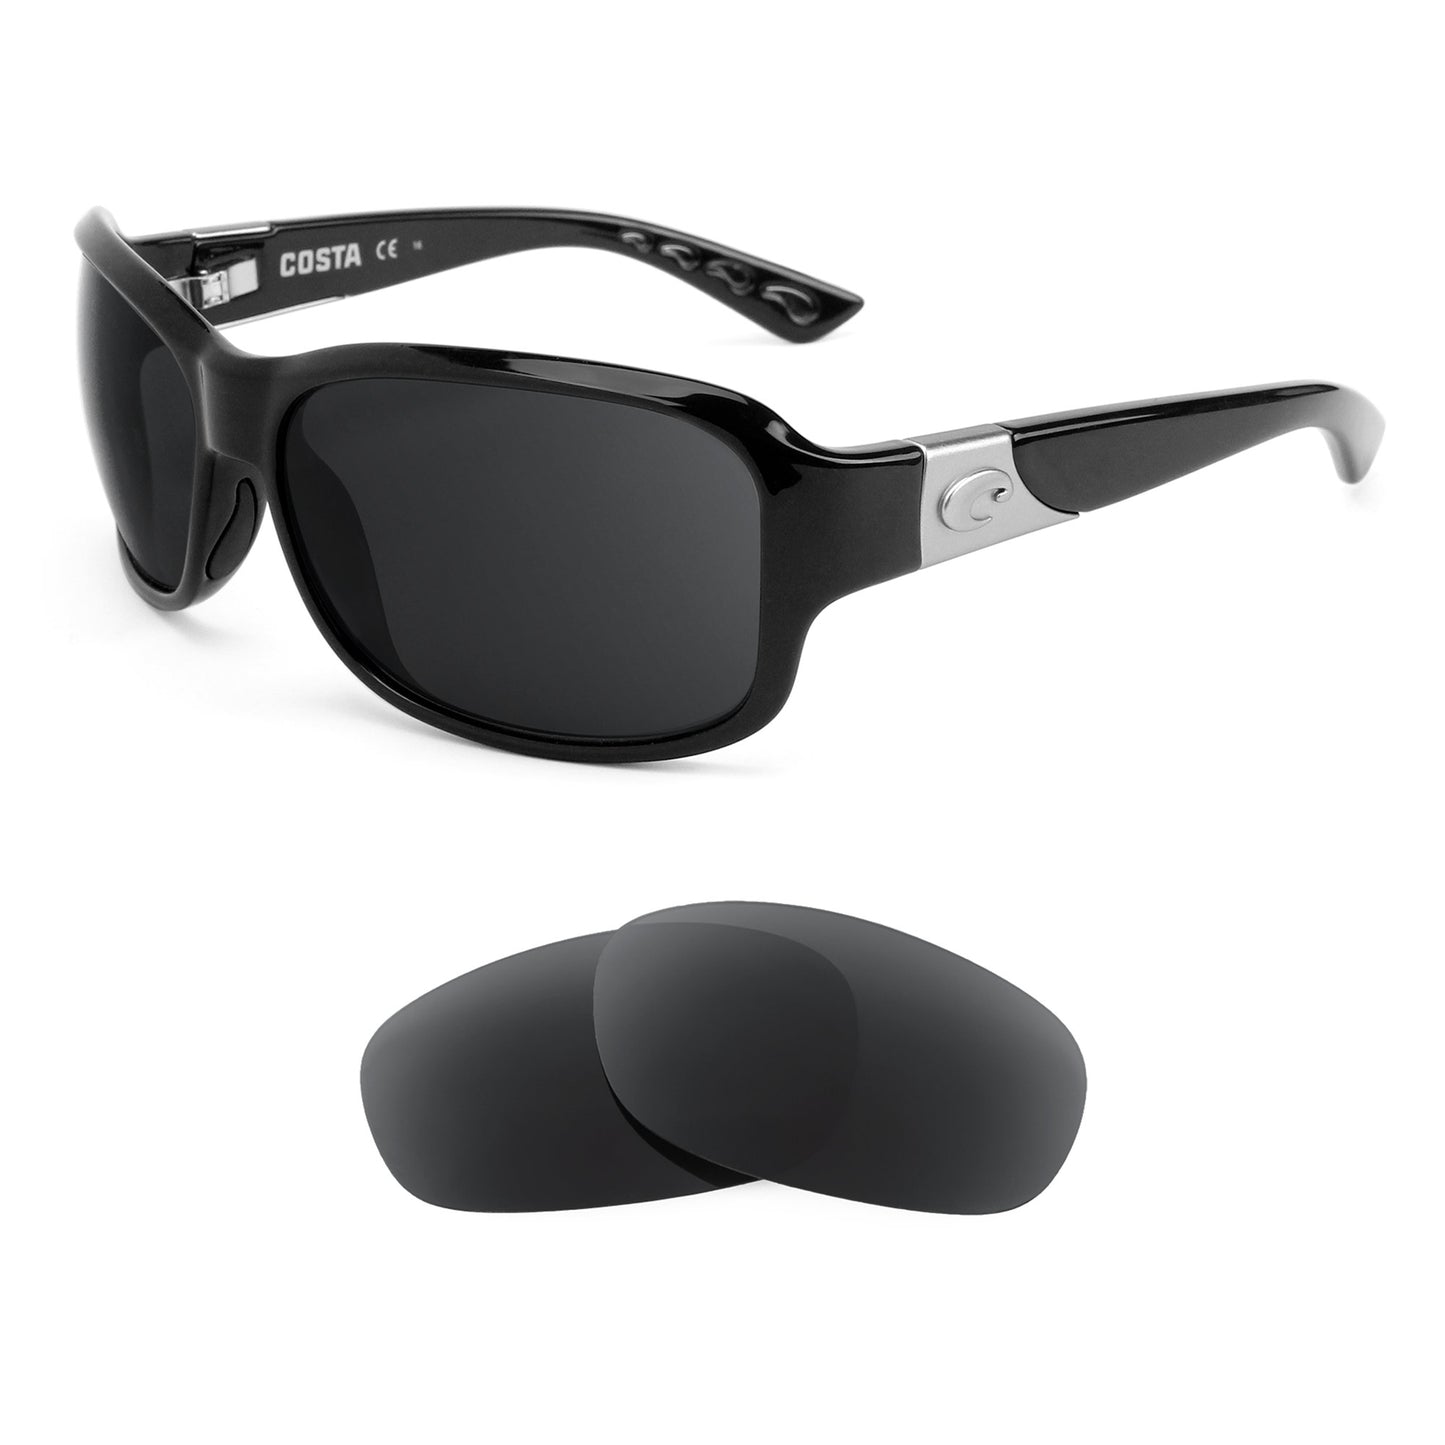 Costa Inlet sunglasses with replacement lenses